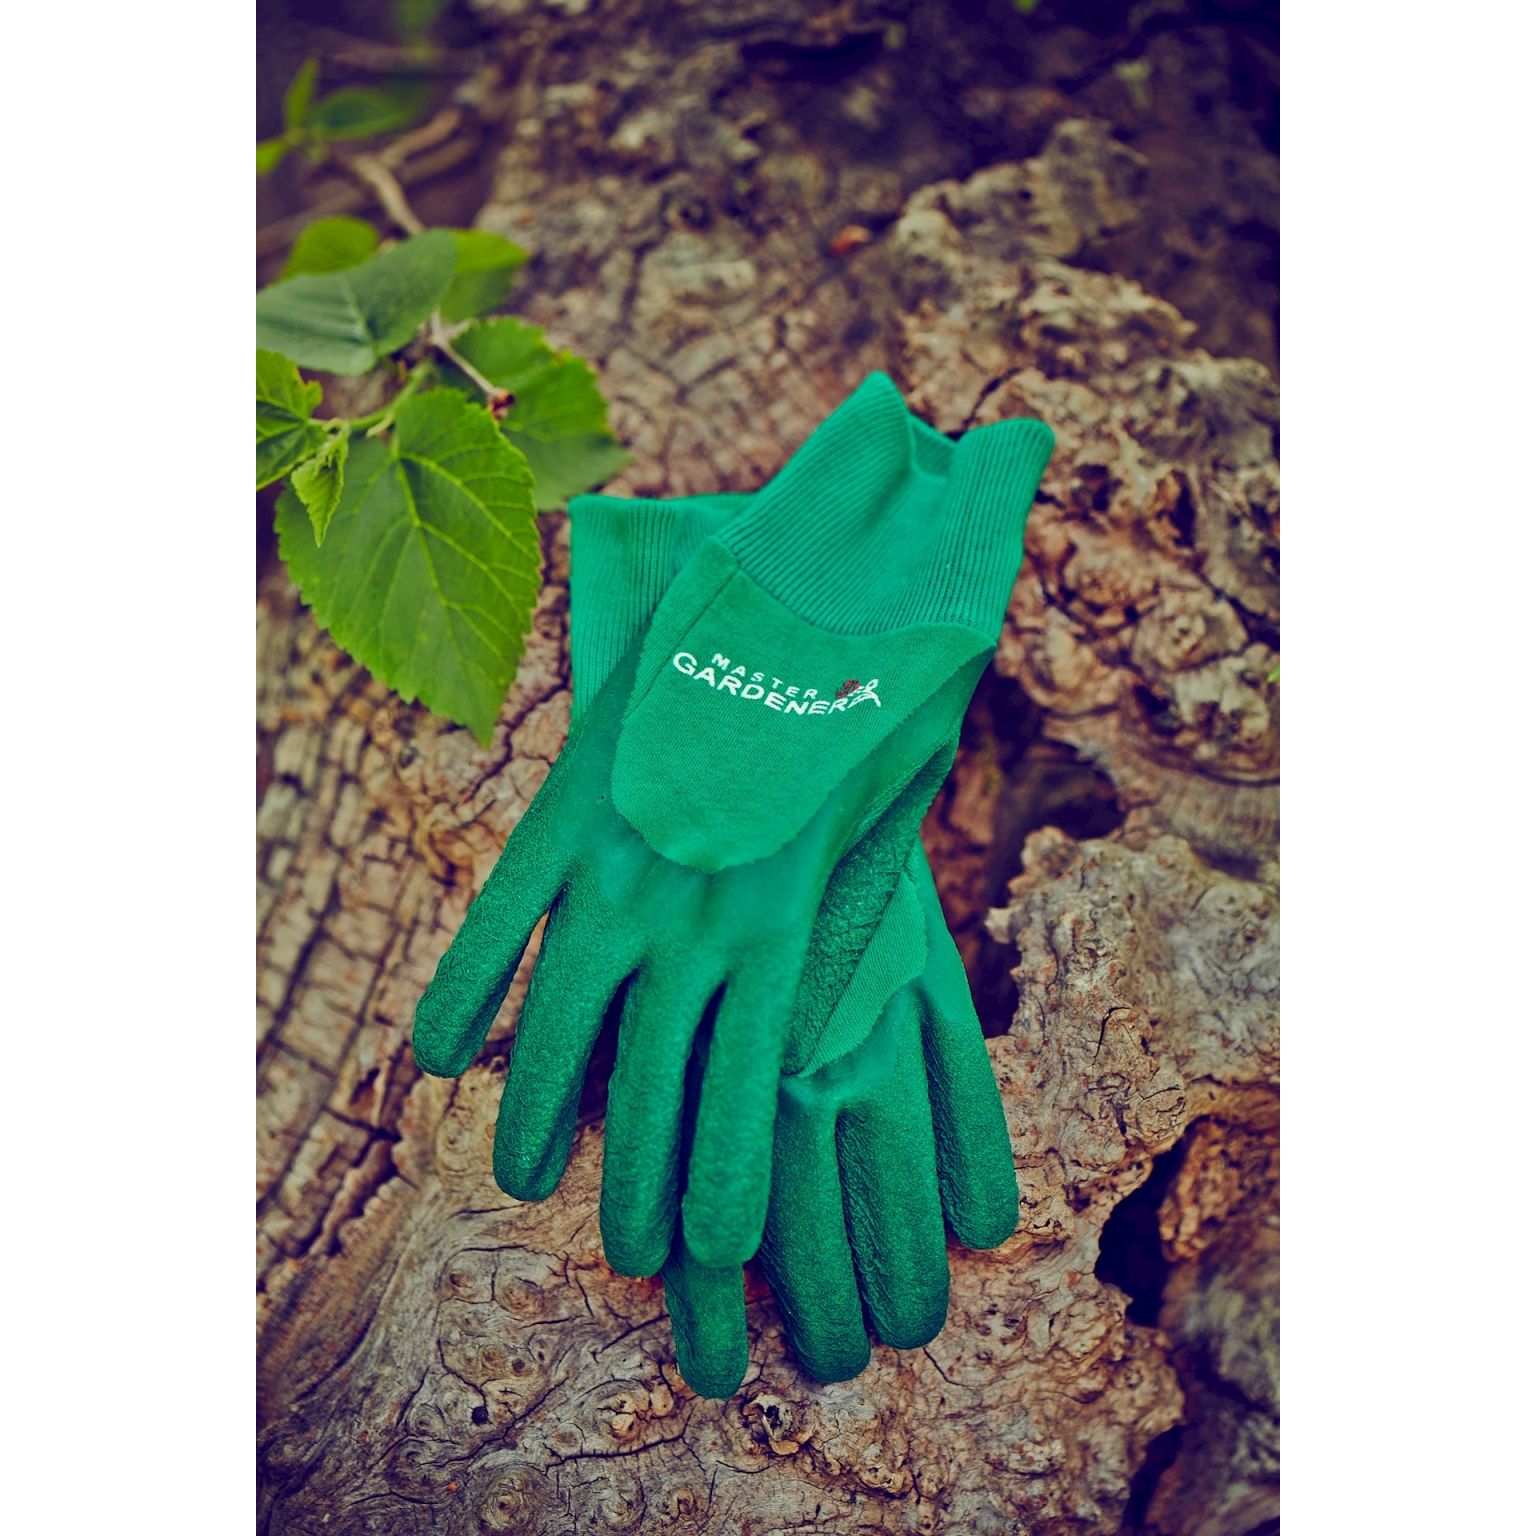 New Town And Country Master Gardener Gardening Gloves Glove Green Small TGL200S 